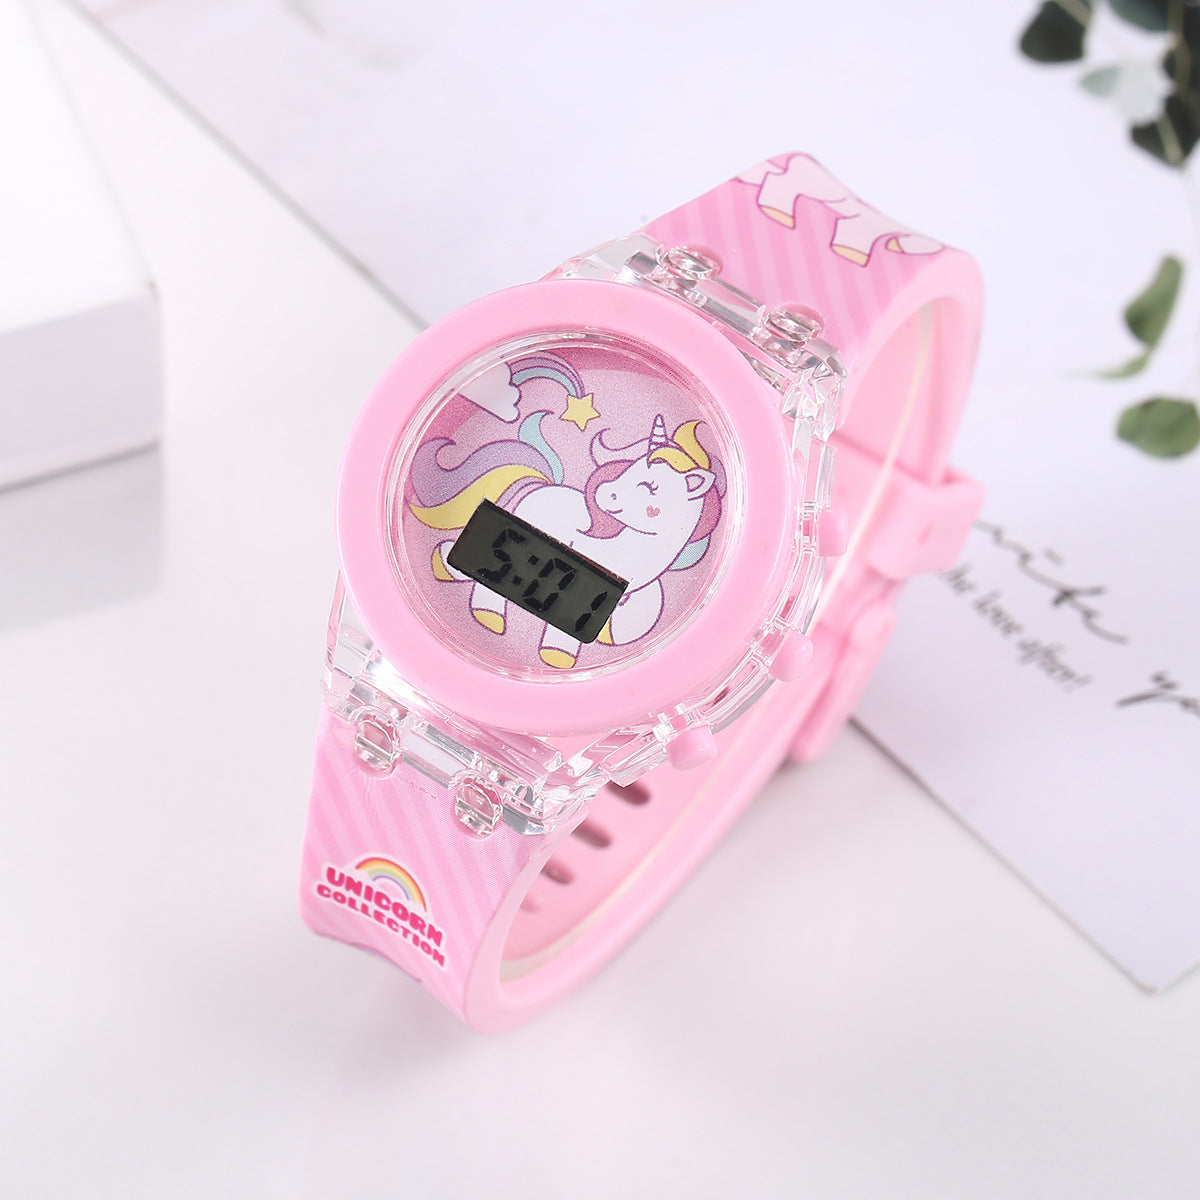 Enchanted Unicorn Kids' Watches: Magical Digital LED Collection